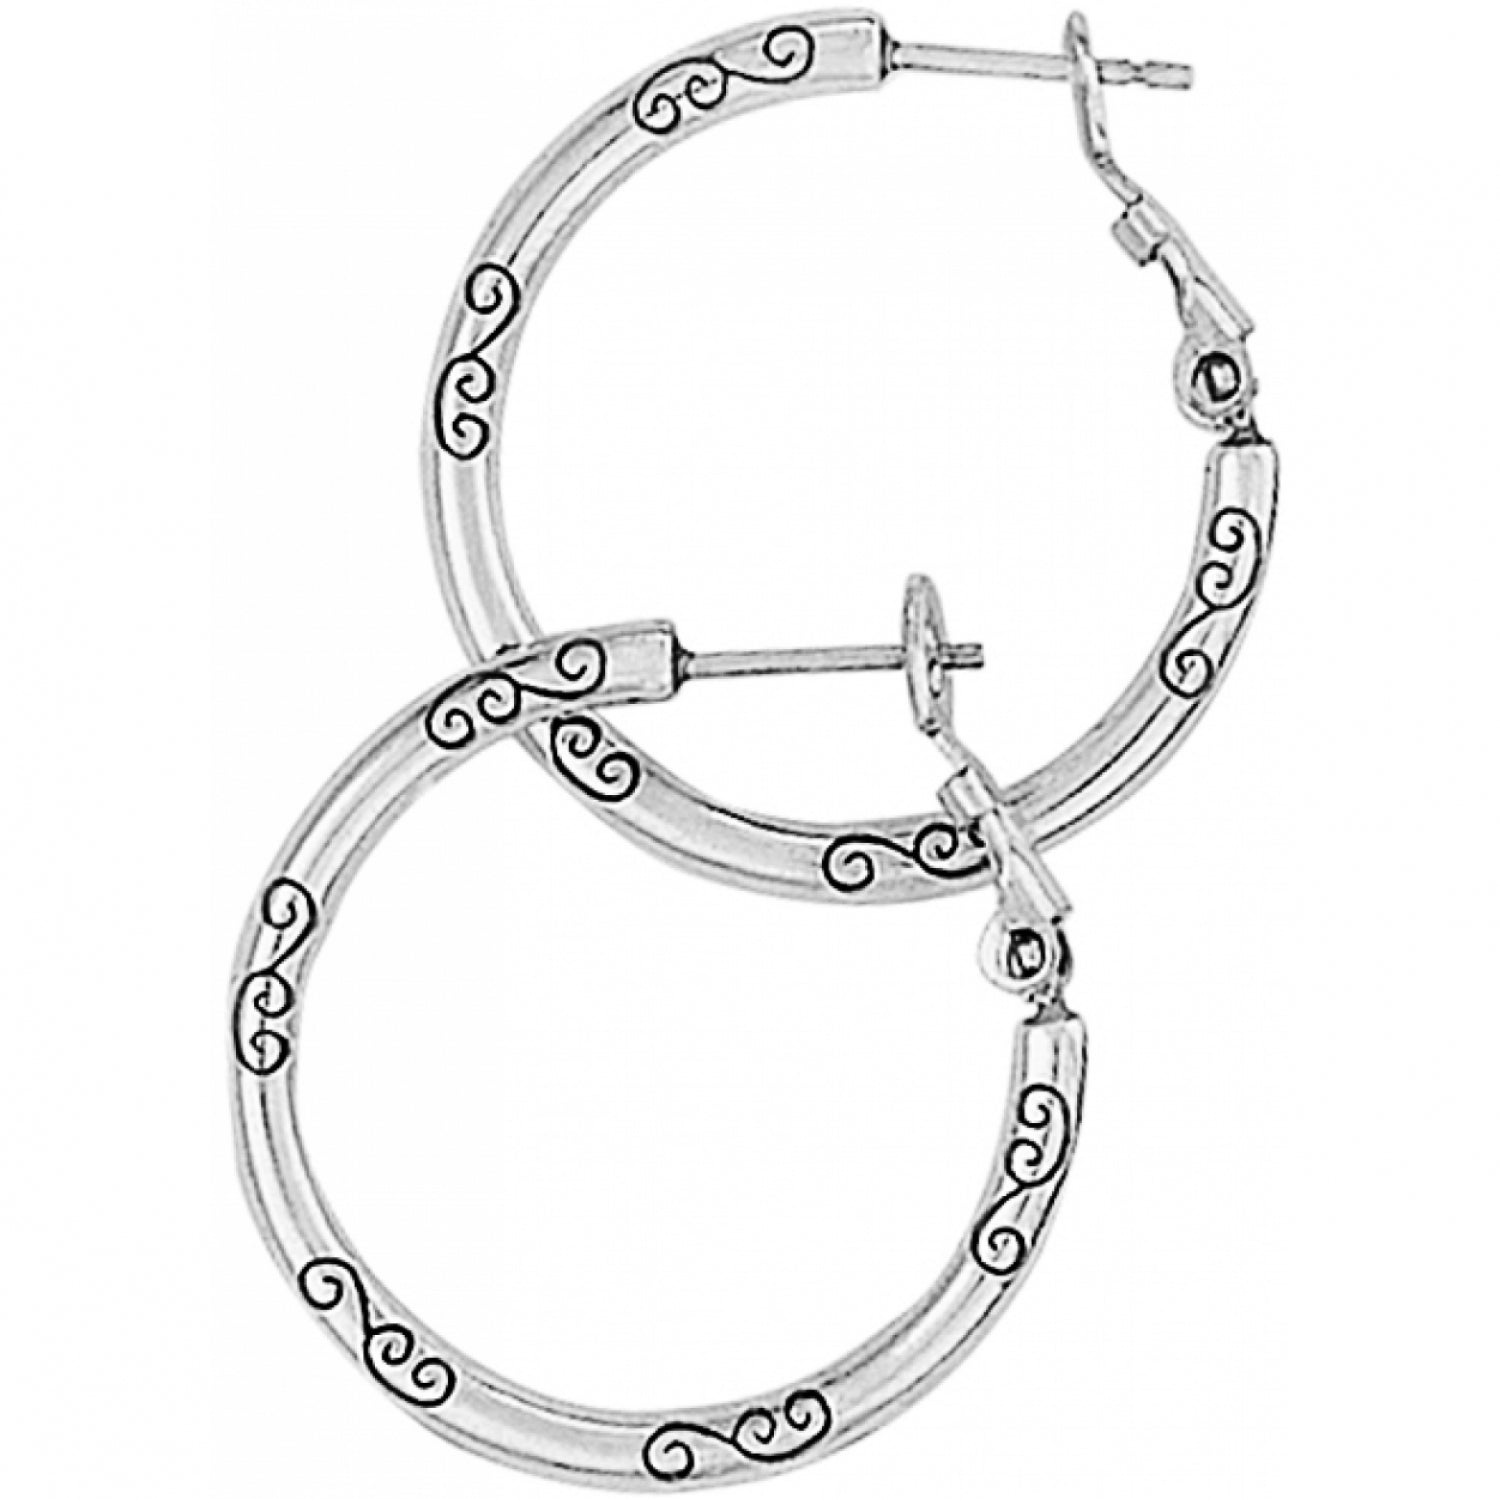 Abc Small Earring Charm Hoop Silver